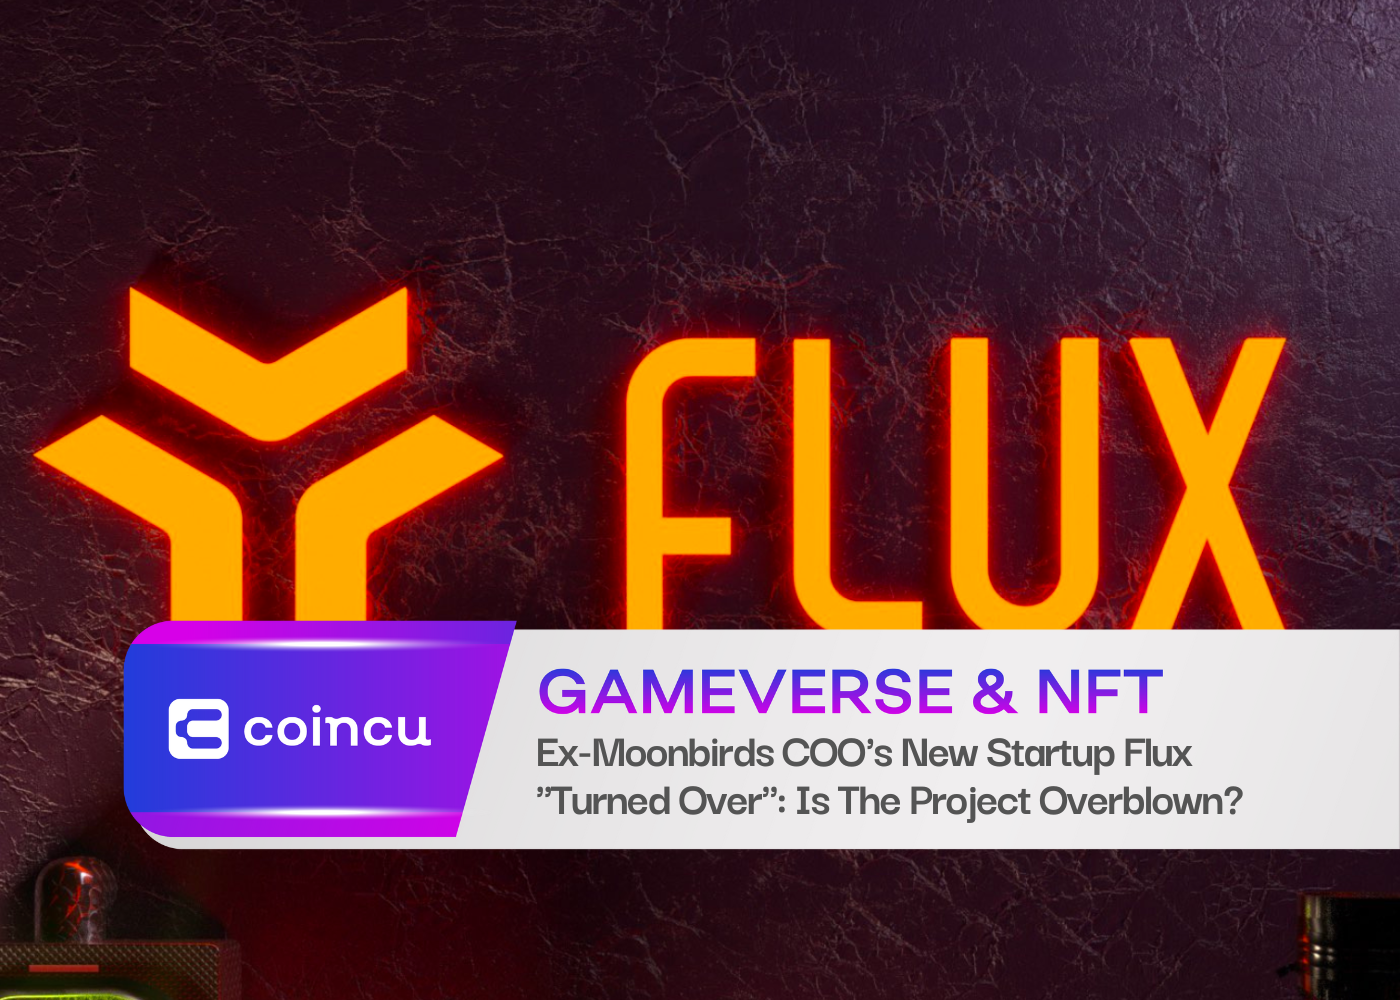 Ex-Moonbirds COO's New Startup Flux "Turned Over": Is The Project Overblown?